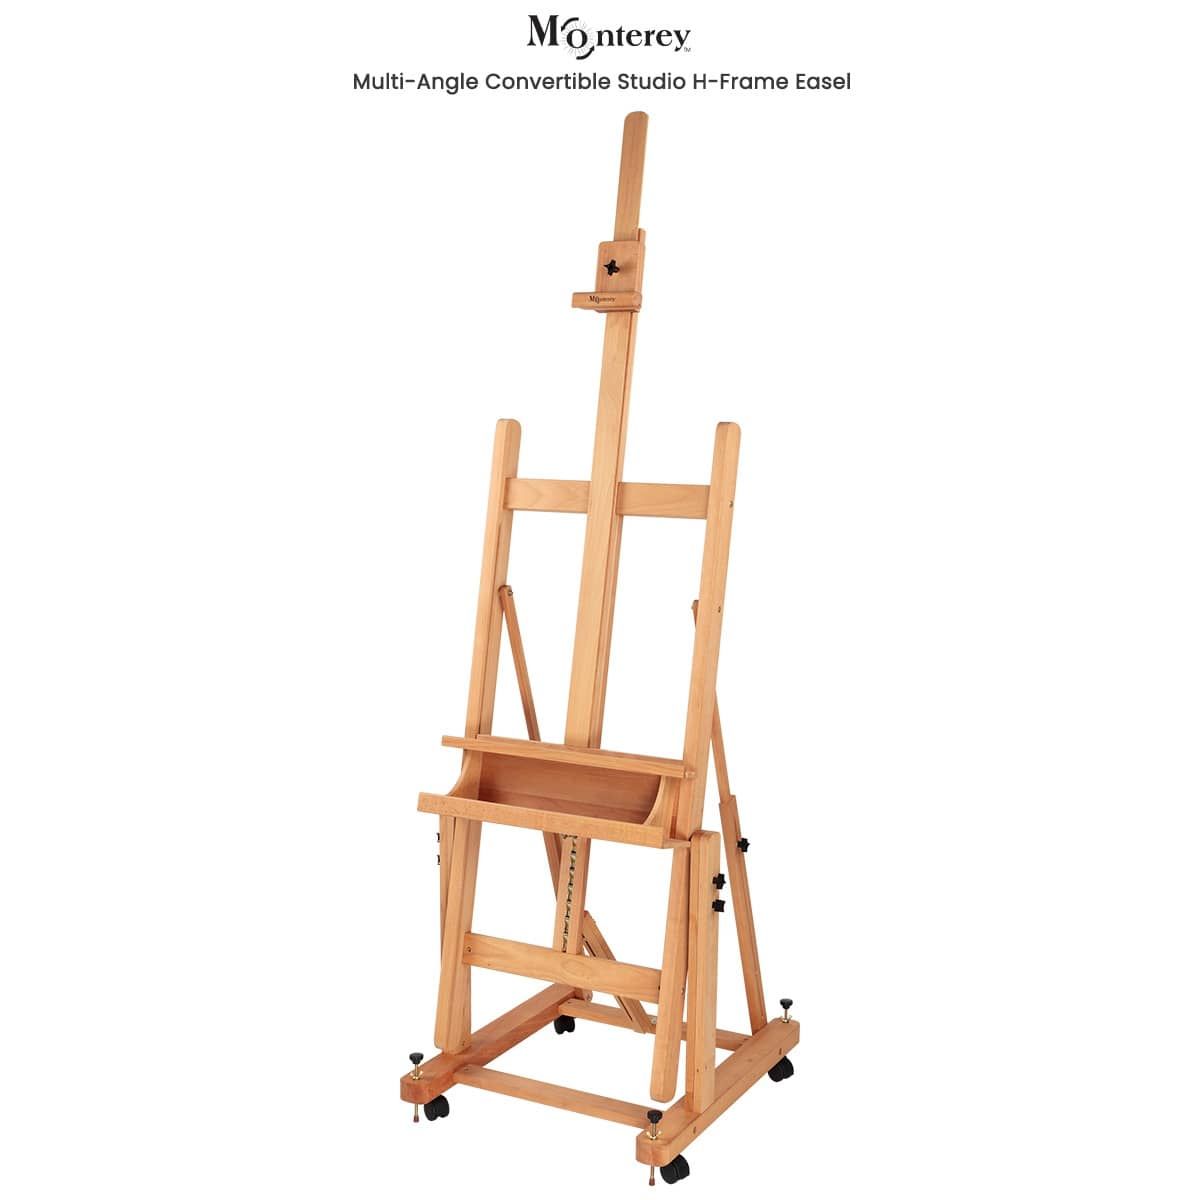 Extra Large Double Mast Wooden H-Frame Studio Floor Easel with